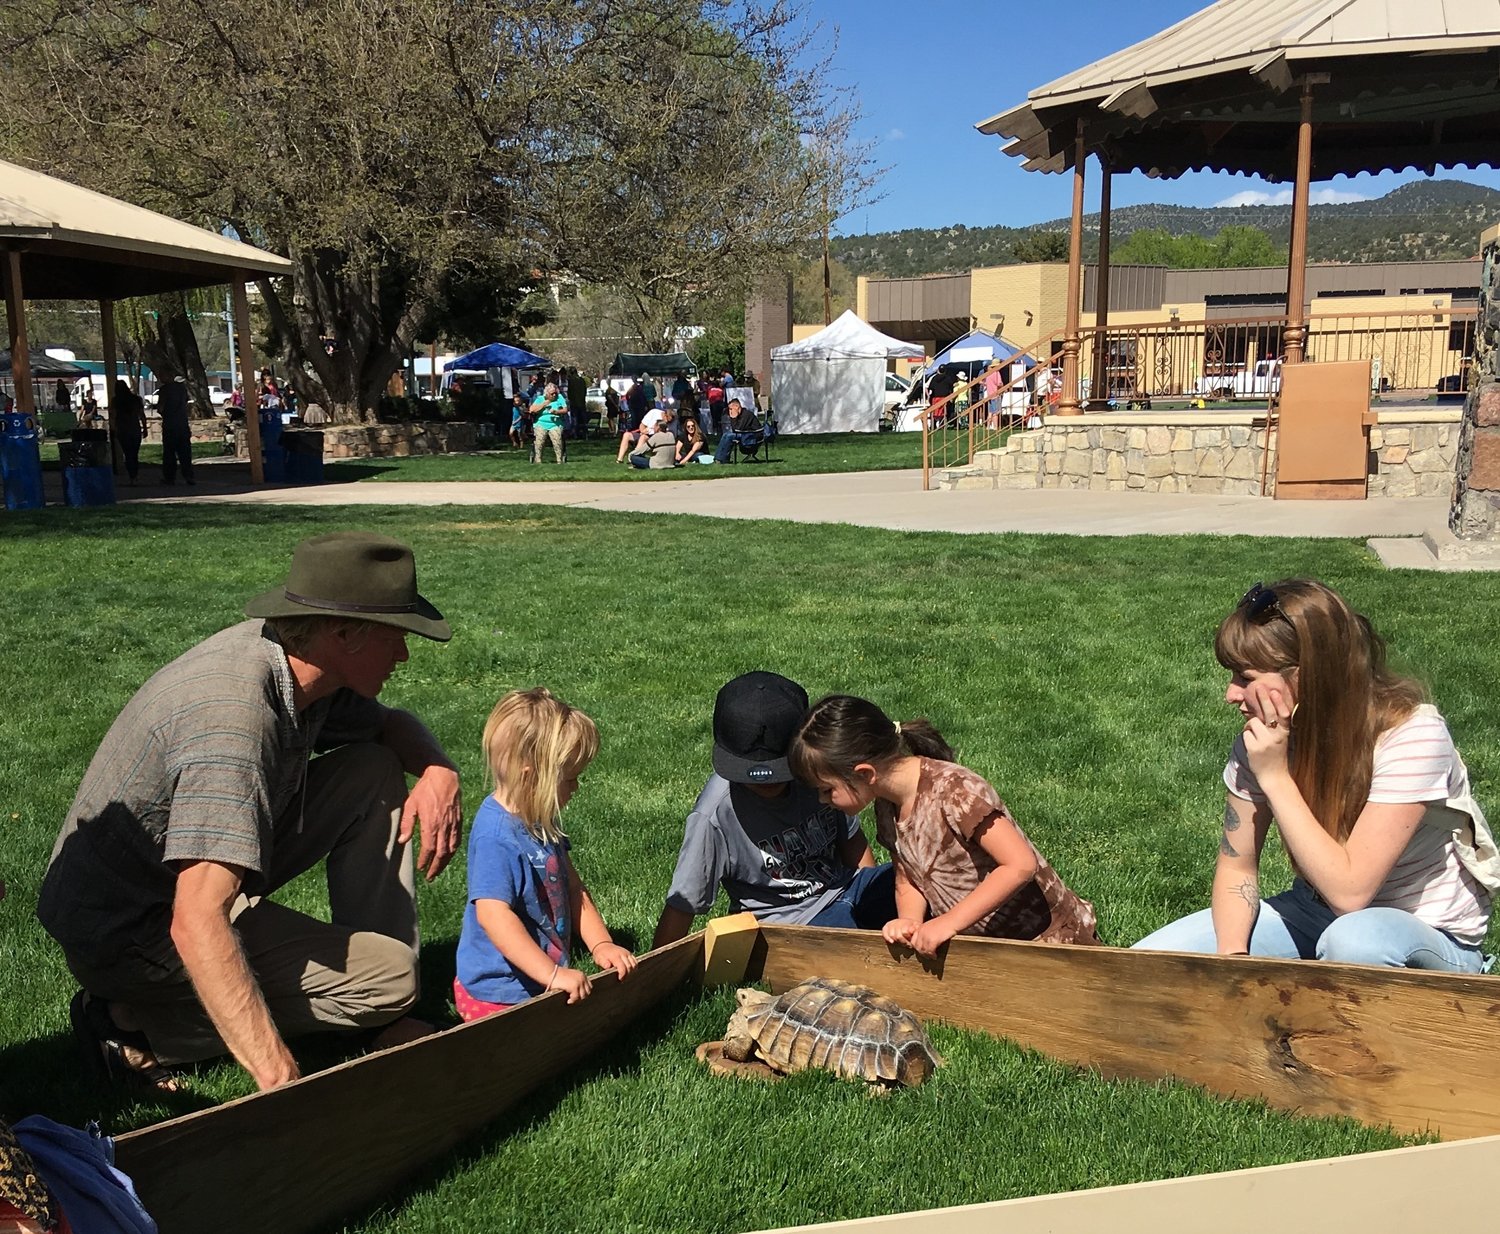 Indi Blake of the Silver City Watershed Keepers introduces Flower the tortoise to new friends at a previous Gila Earth Day.